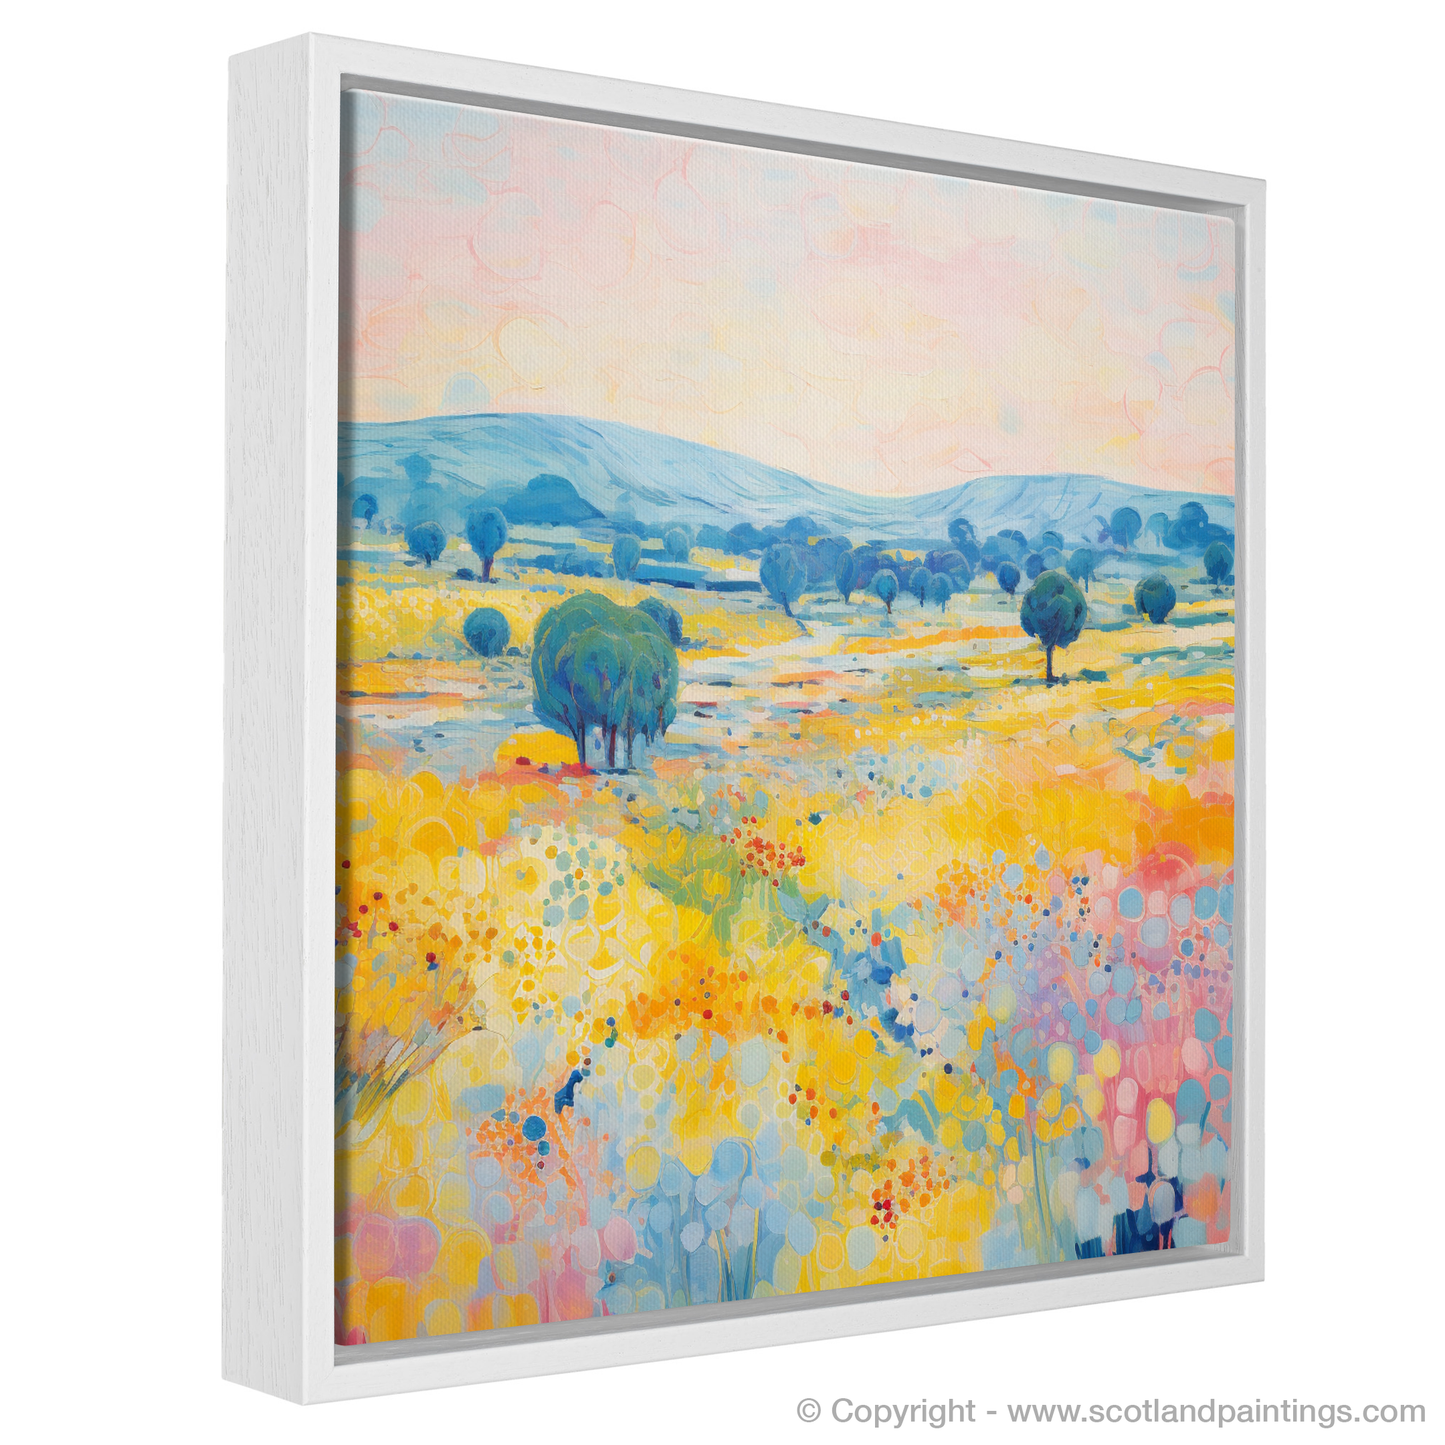 Painting and Art Print of Glenesk, Angus in summer entitled "Summer Symphony in Glenesk".